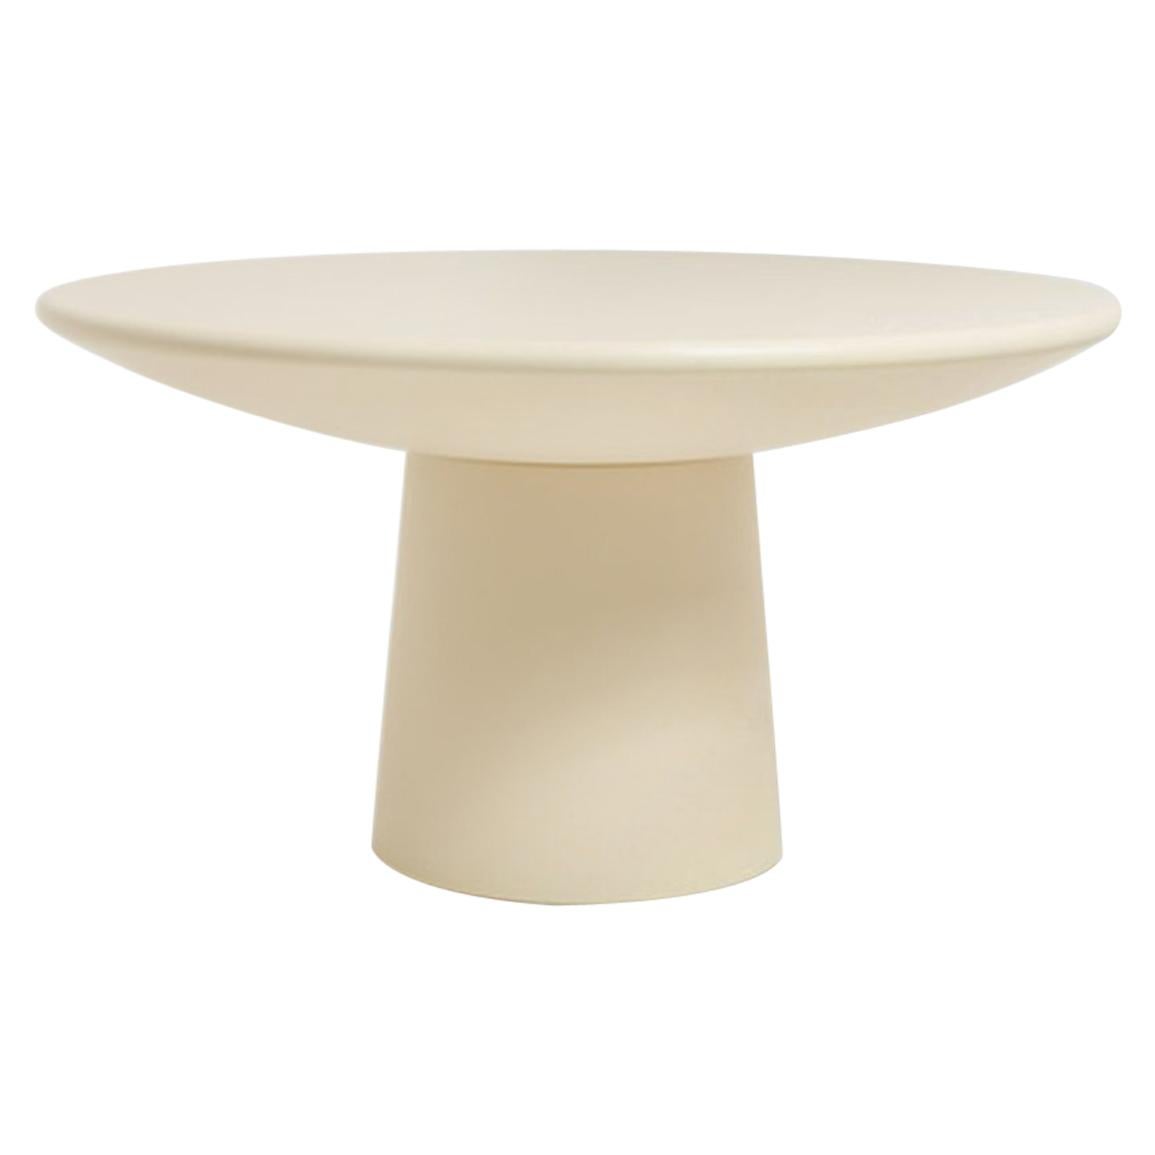 Roly Poly Cream Circular Round Contemporary Dining Table by Faye Toogood, London For Sale